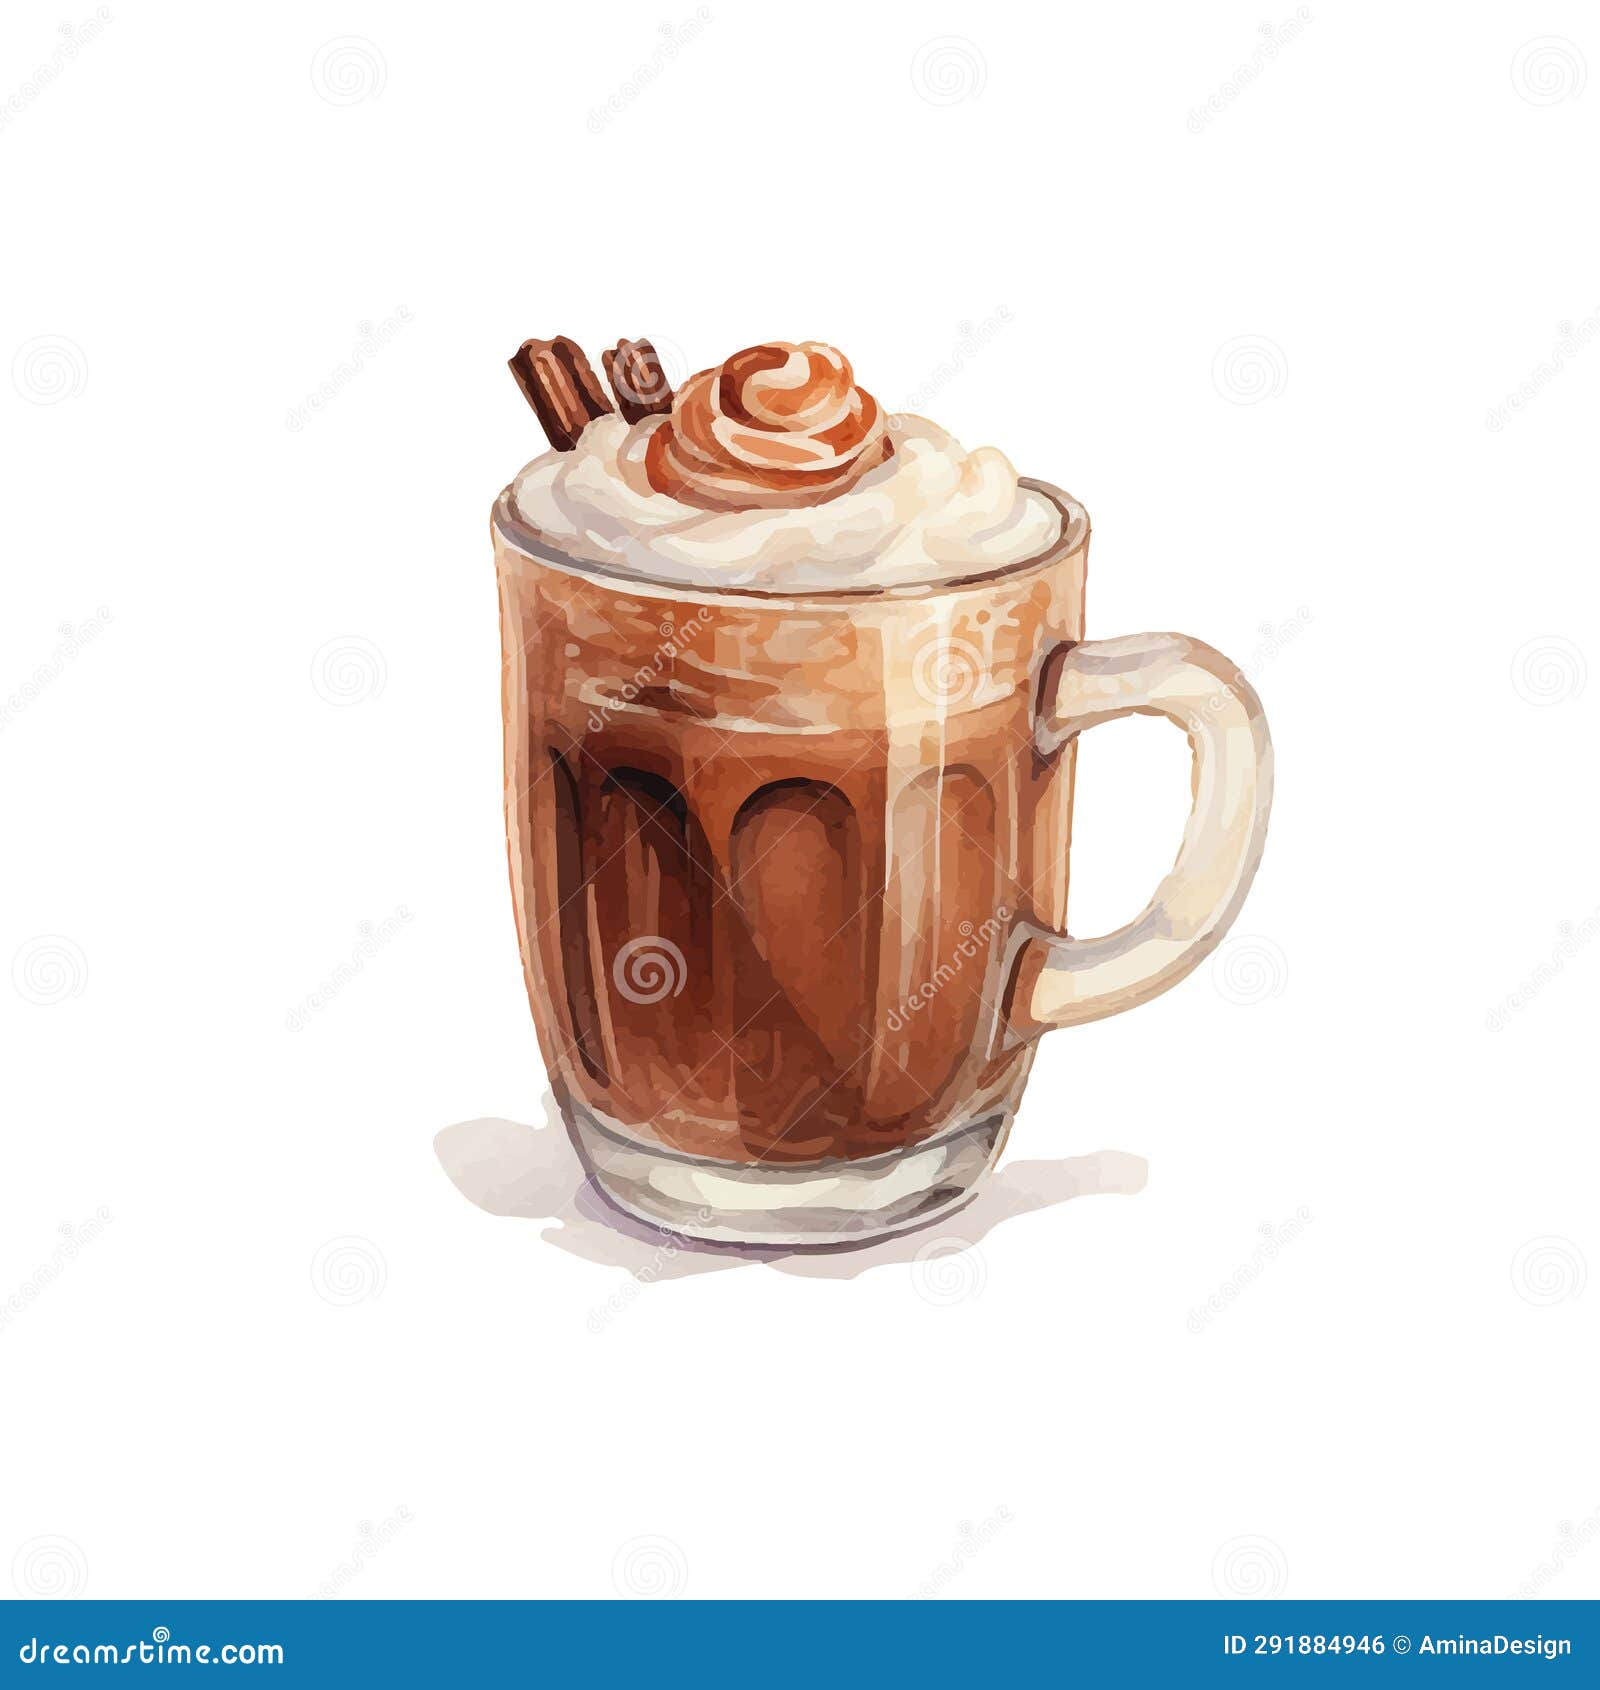 https://thumbs.dreamstime.com/z/hot-coffee-latte-cup-watercolor-vector-illustration-hot-cappuccino-whipped-cream-hot-coffee-latte-cup-291884946.jpg